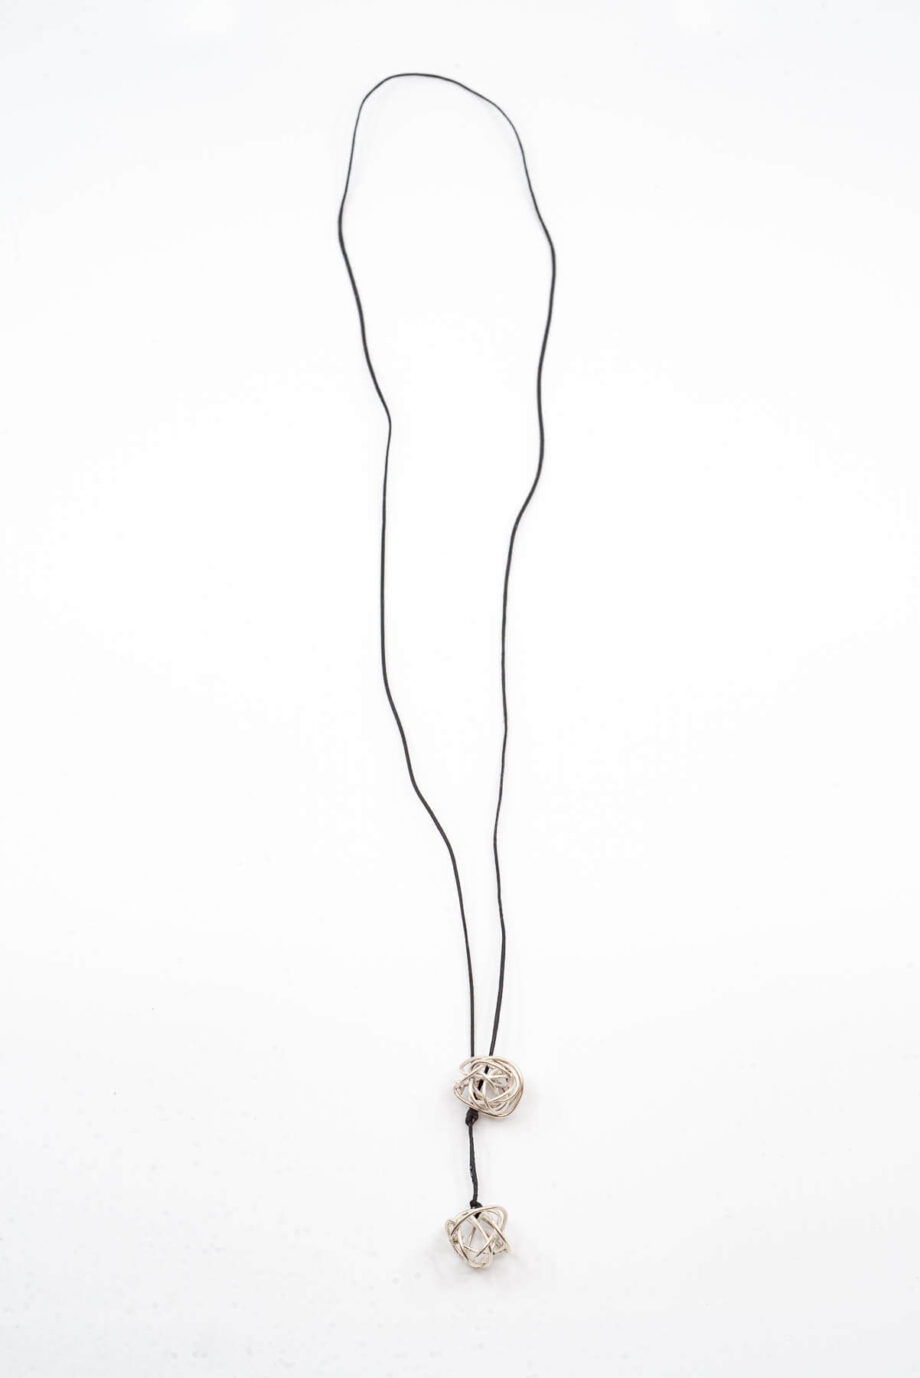 Marilena Synthesis Necklace 69 310